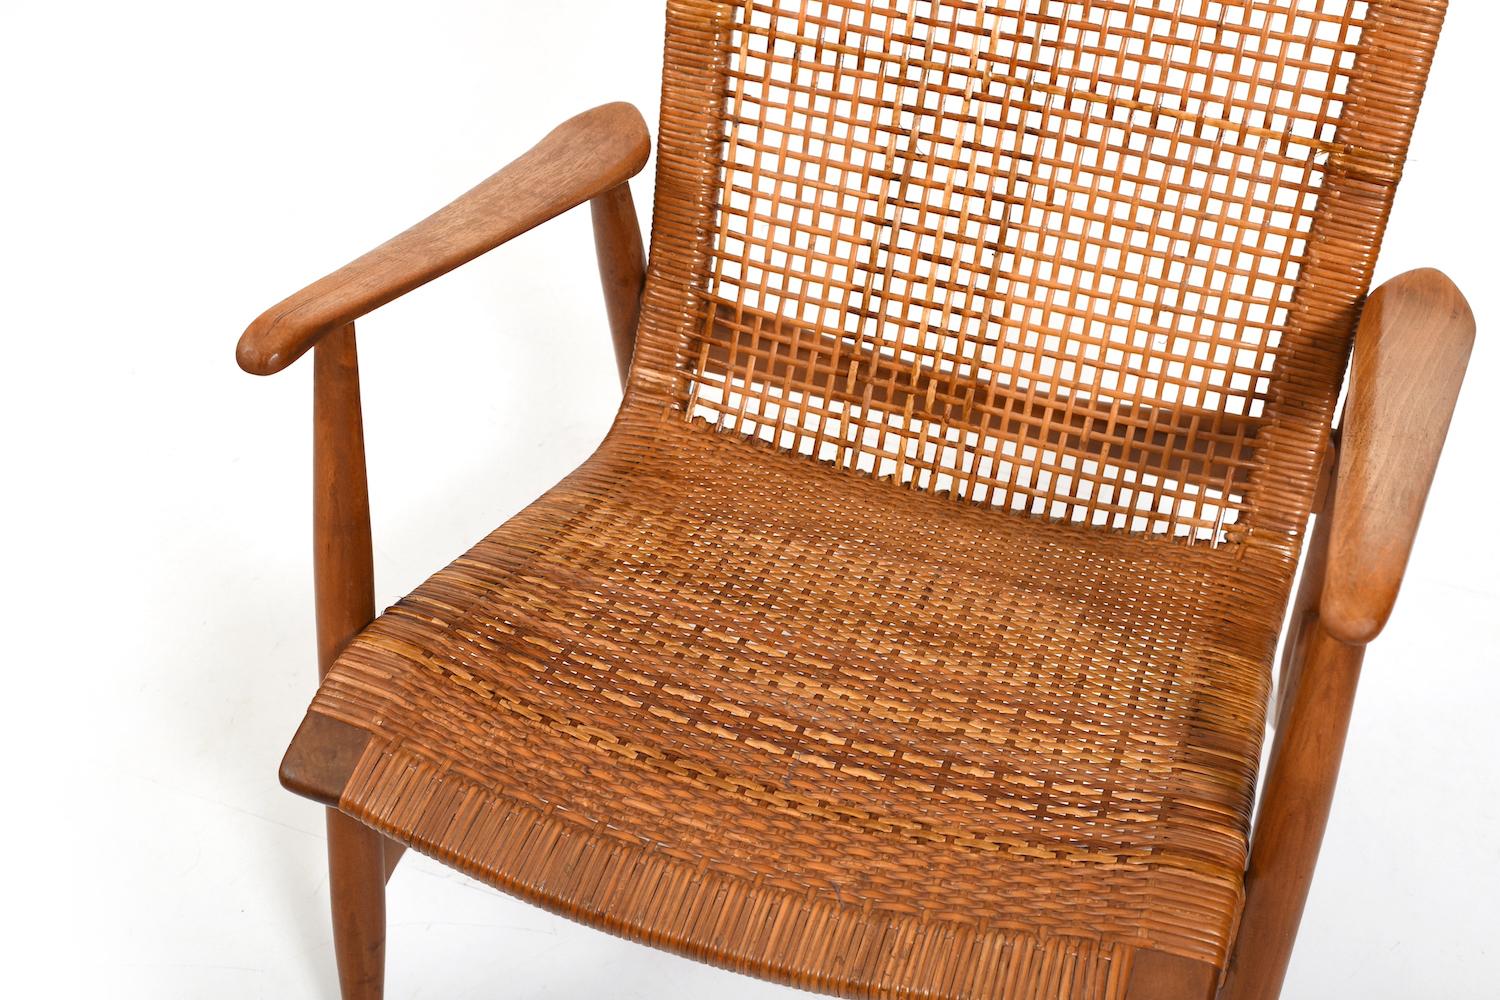 20th Century Ib Kofod-Larsen attr. Easychair with Cane early 1950s. For Sale